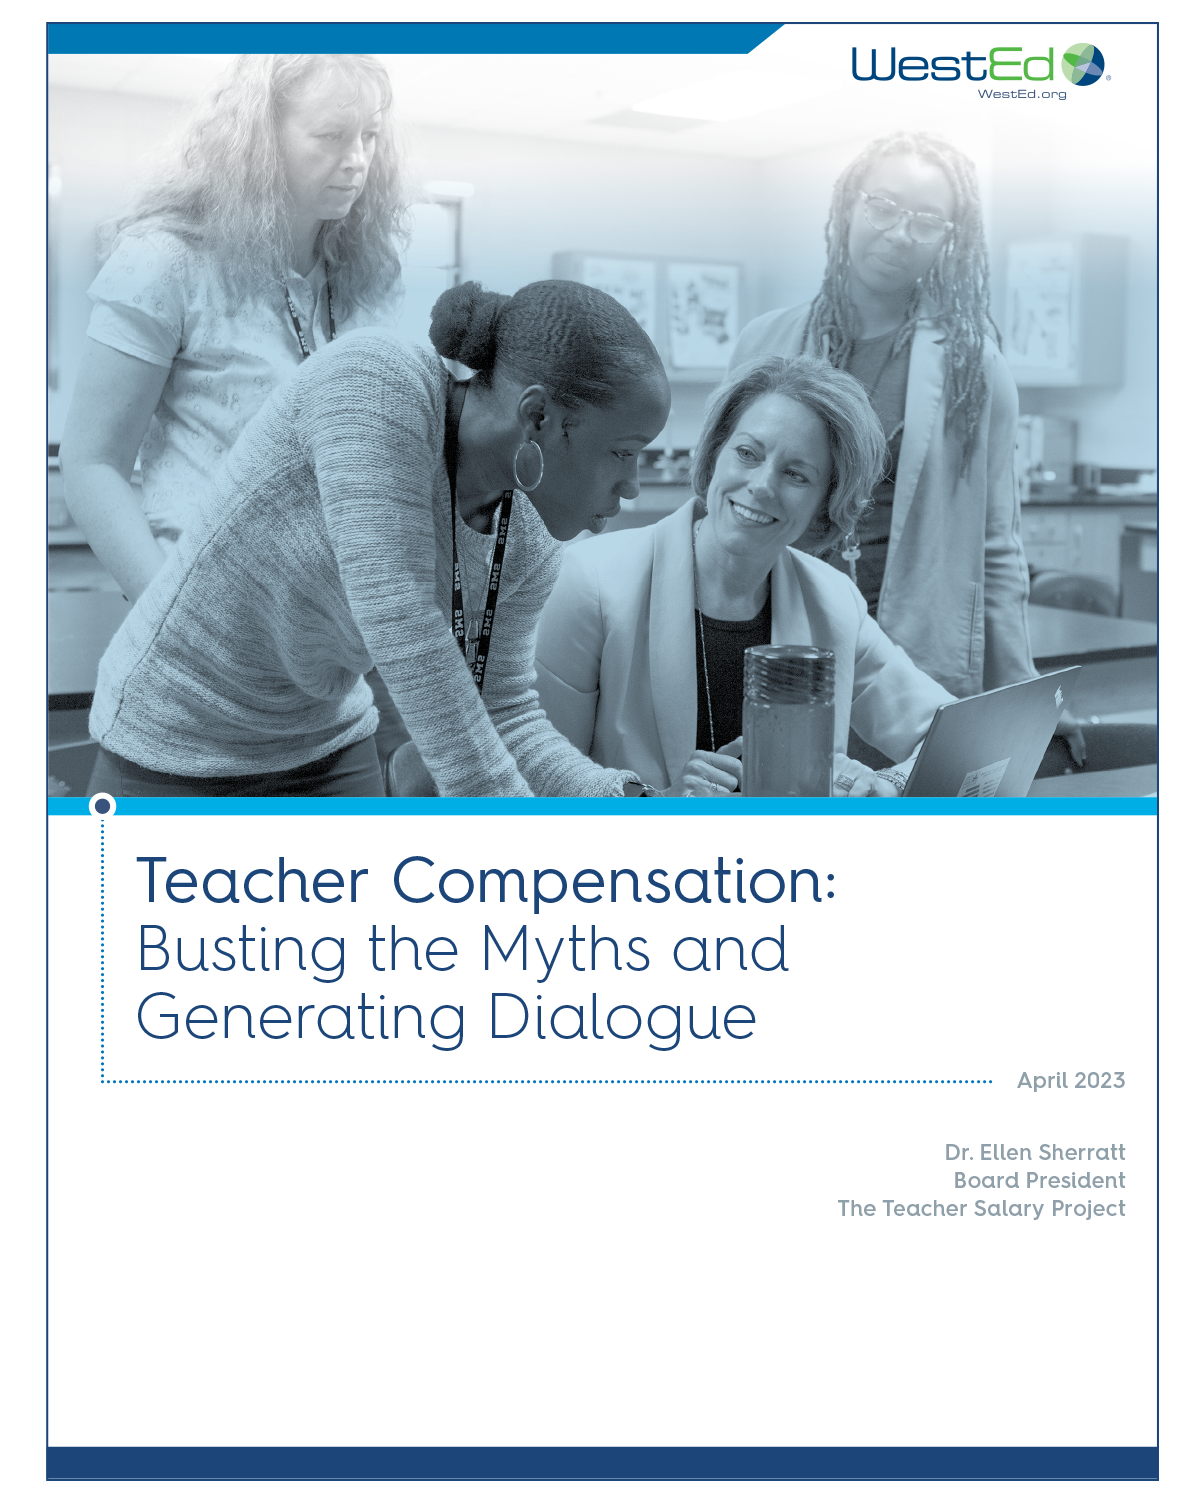 Teacher Compensation: Busting the Myths and Generating Dialogue